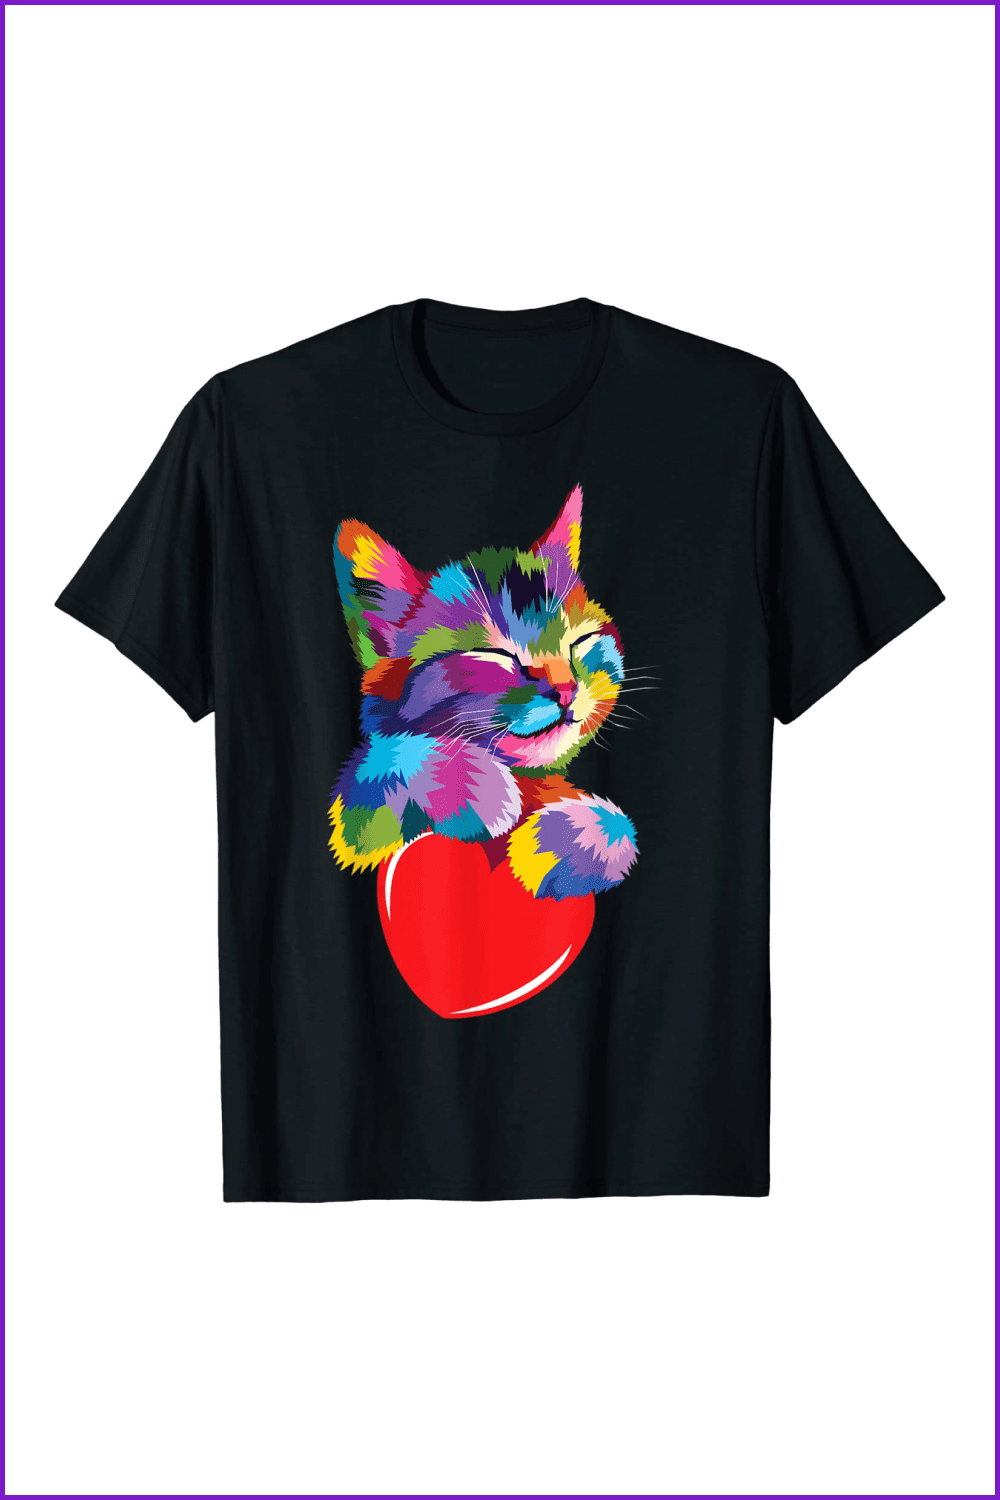 Cute Cat Gift for kitten lovers Colorful Art Kitty Adoption T-Shirt.